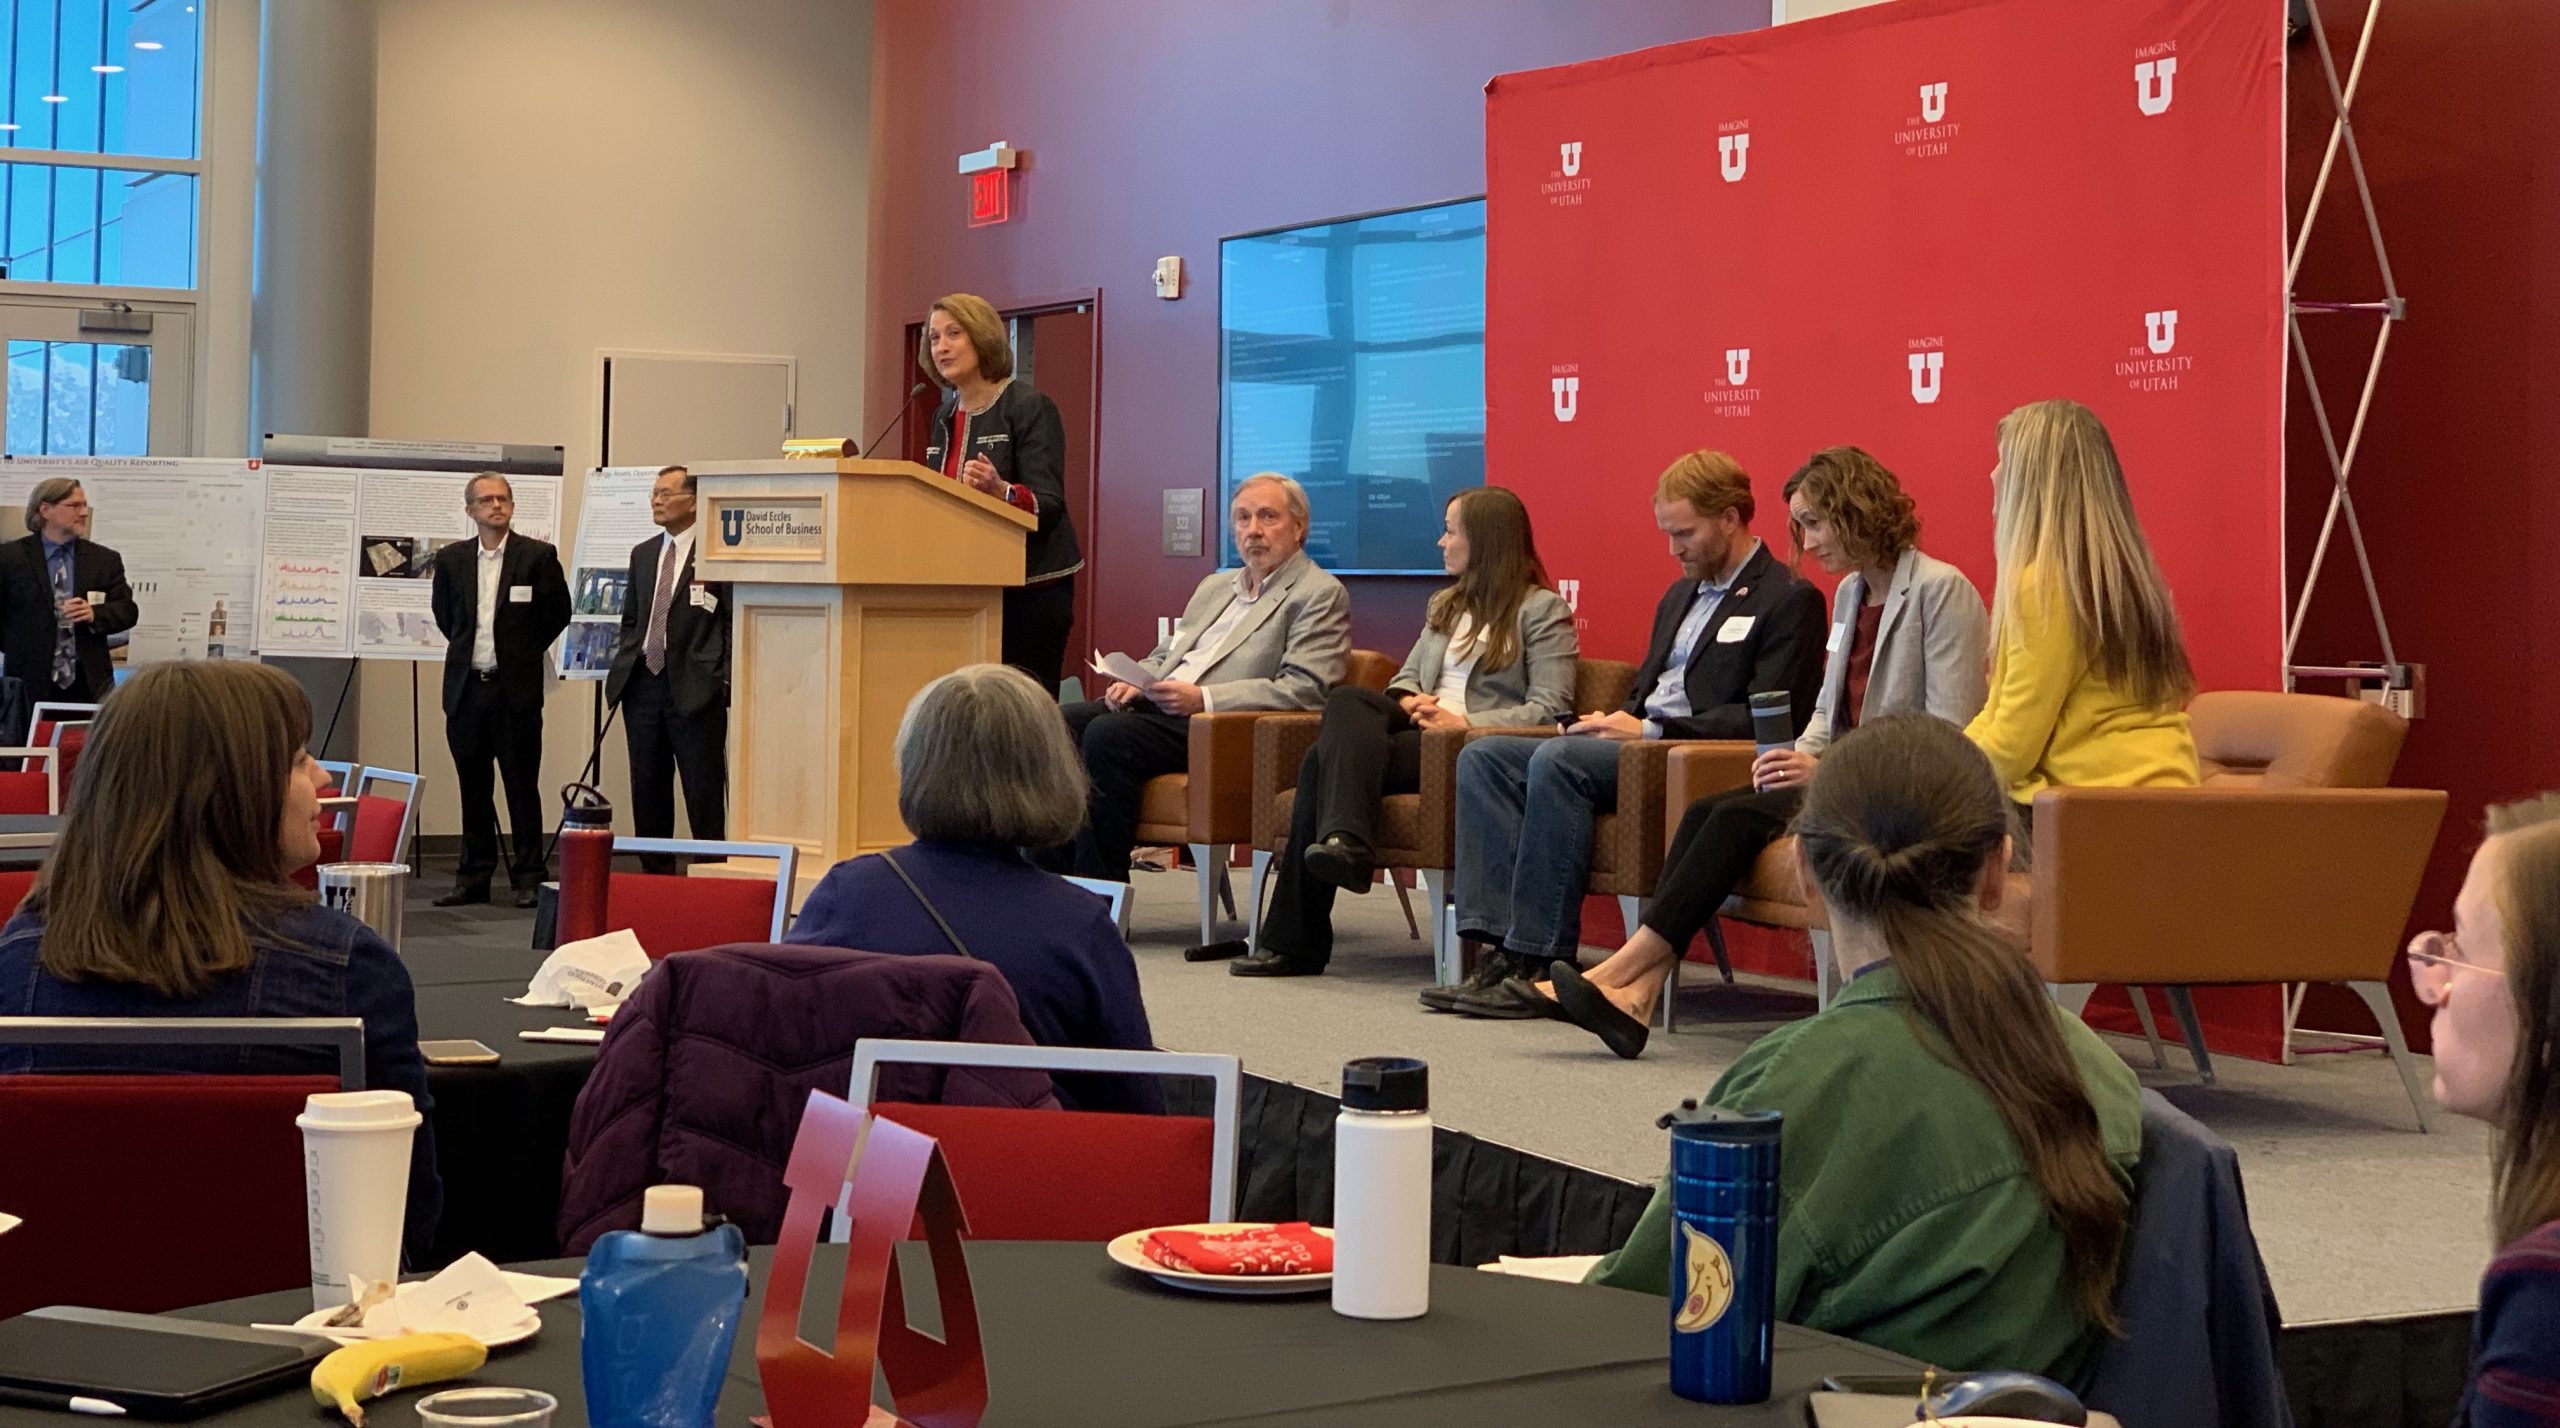 President Ruth Watkins stands at a podium next to five seated panelists. Attendees are seated and standing around the room.